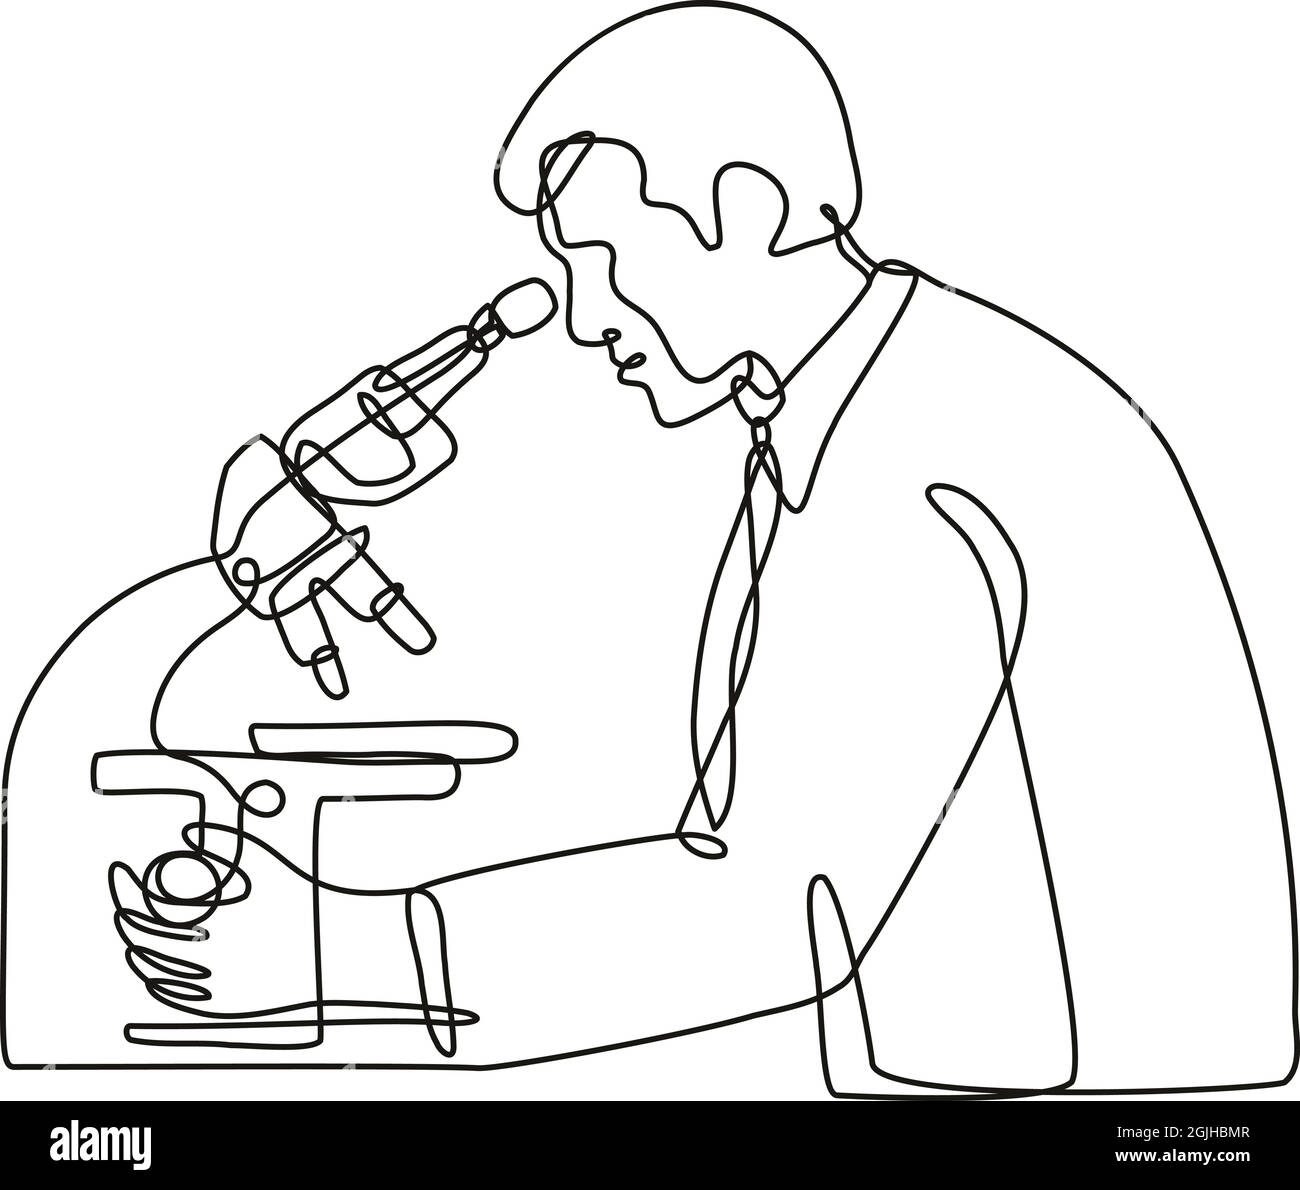 Continuous line drawing illustration of a microbiologist studying a virus with a microscope done in mono line or doodle style in black and white on is Stock Vector